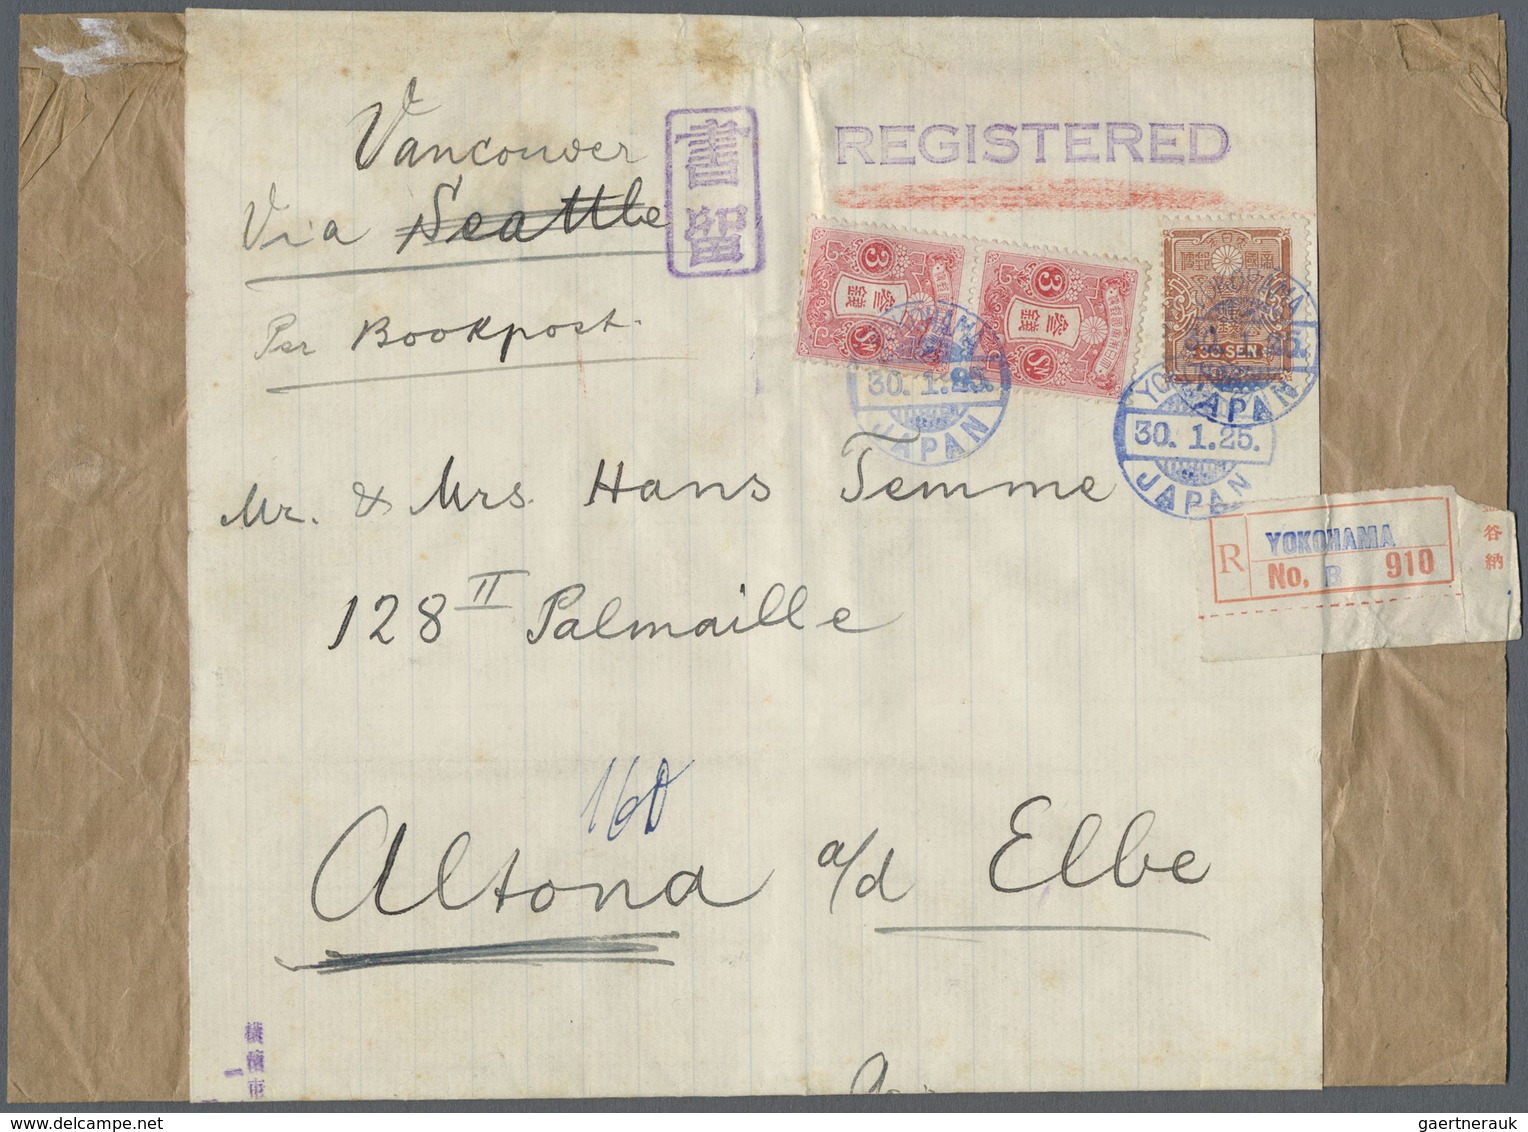 Br/GA Japan: 1875/1926 (ca.), covers (24 inc. earthquakes), stationery cards (53) inc. several UPU 2 S. gr